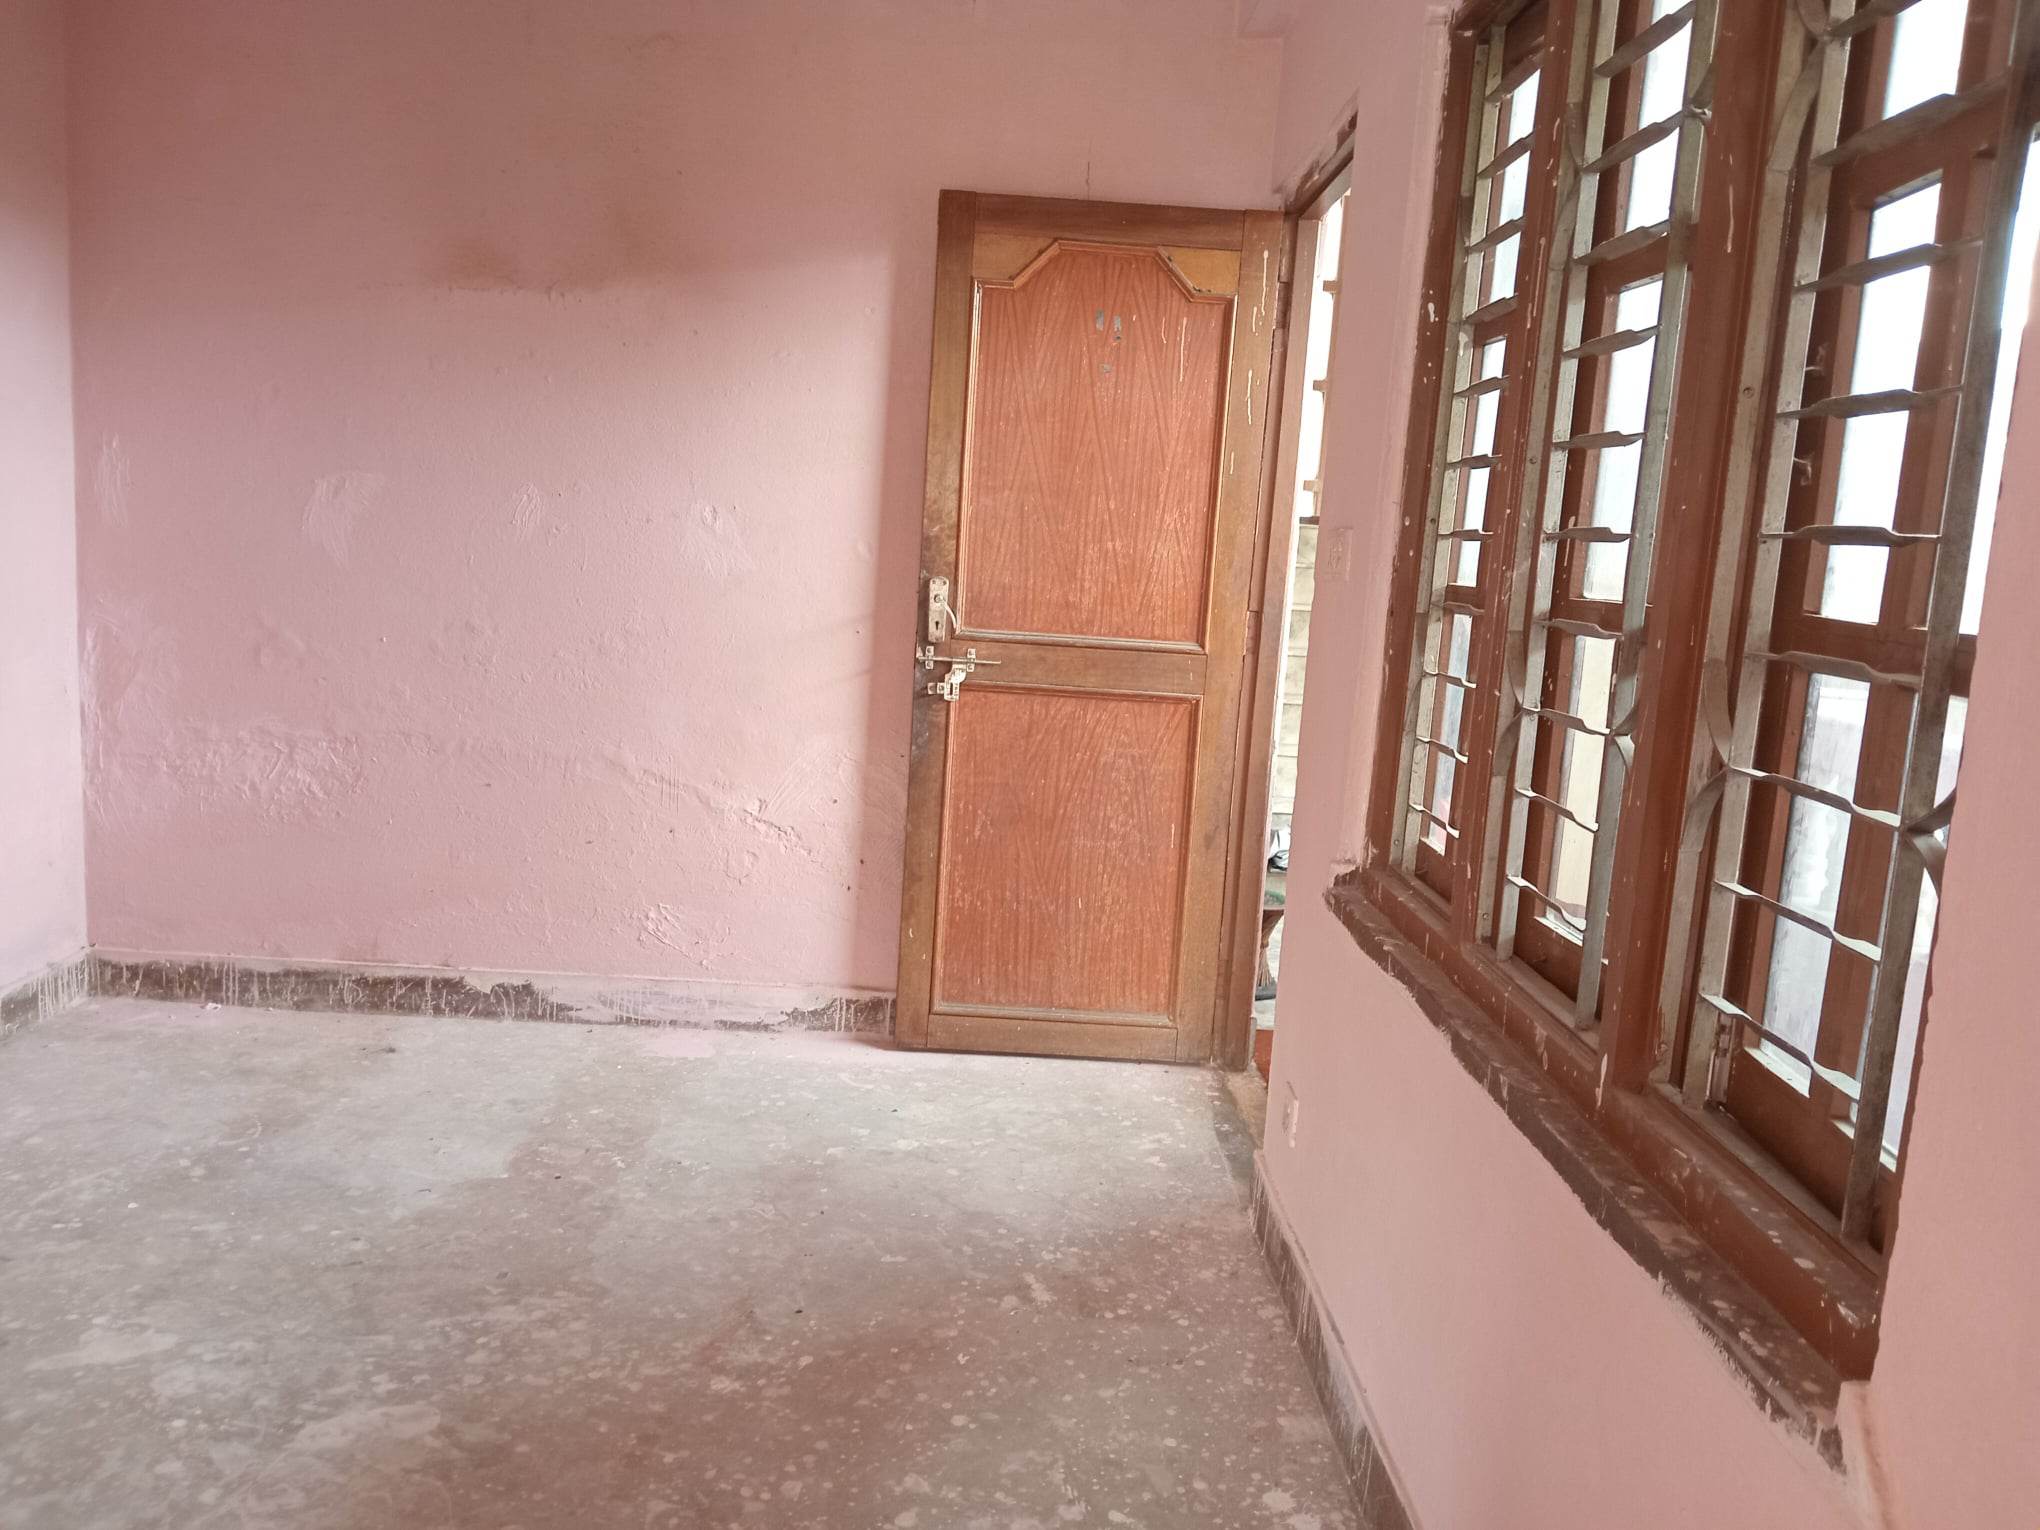 2Rooms for rent at Samakhusi